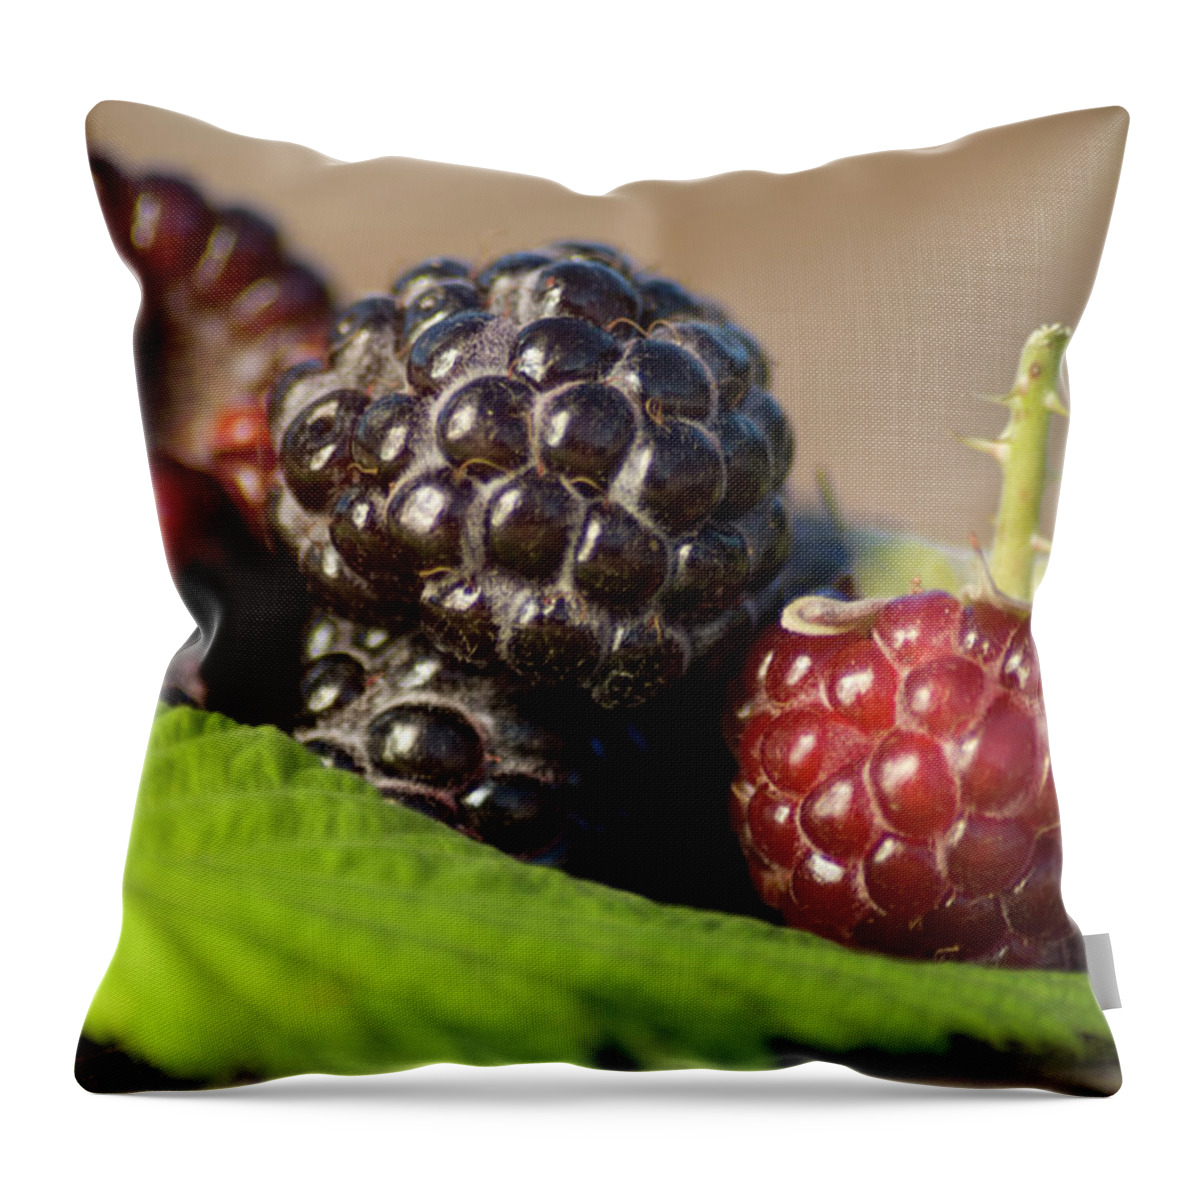 Black Color Throw Pillow featuring the photograph Black Raspberries by Rtyree1